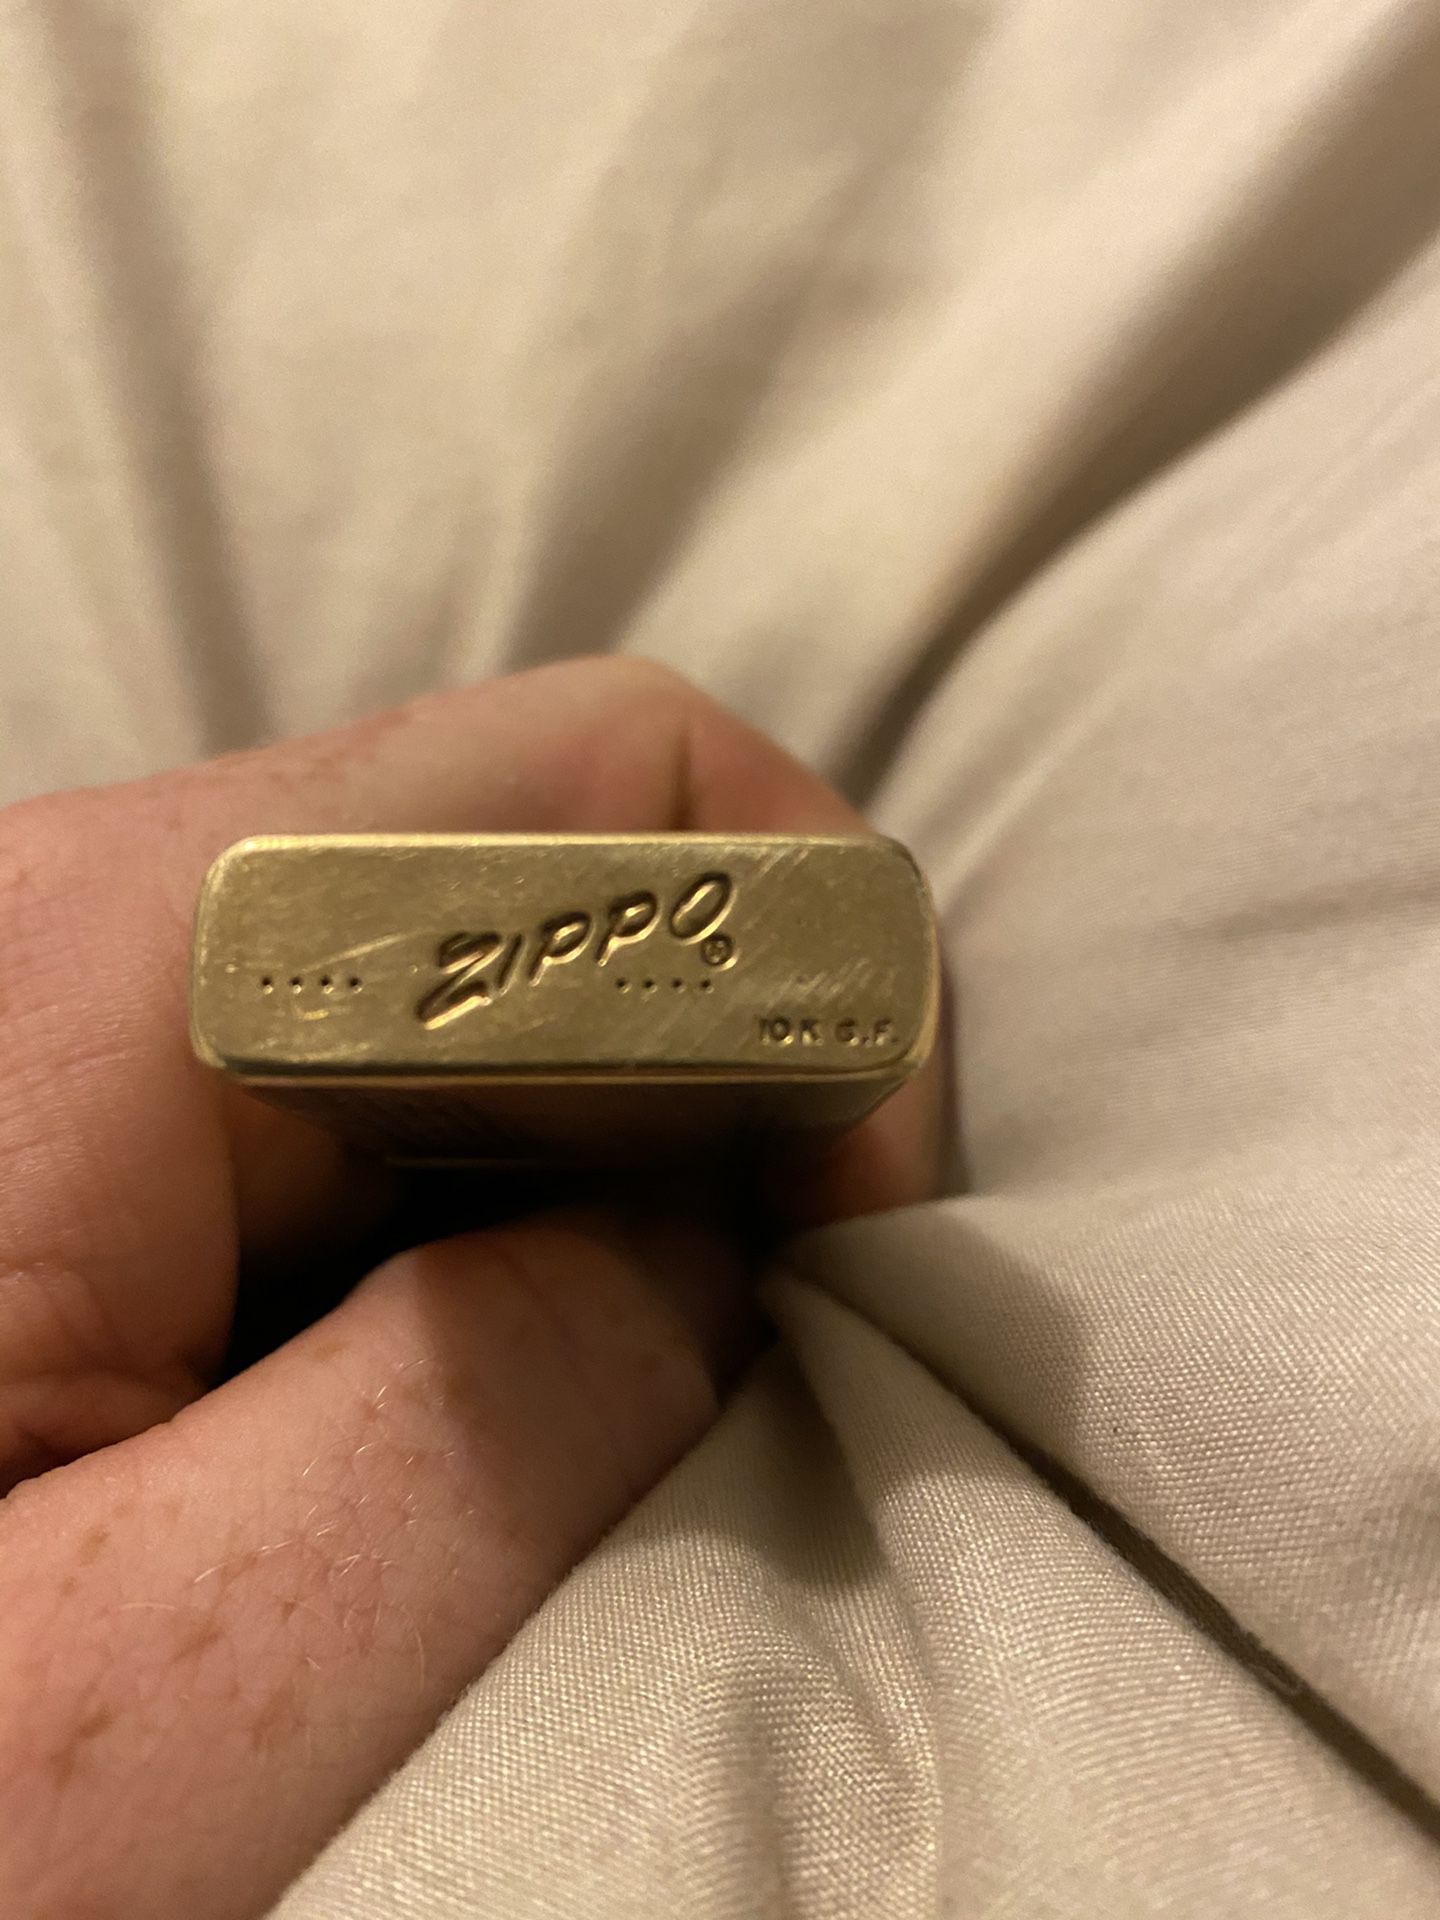 1950 10k Gold Filled Zippo lighter for Sale in Soquel, CA - OfferUp